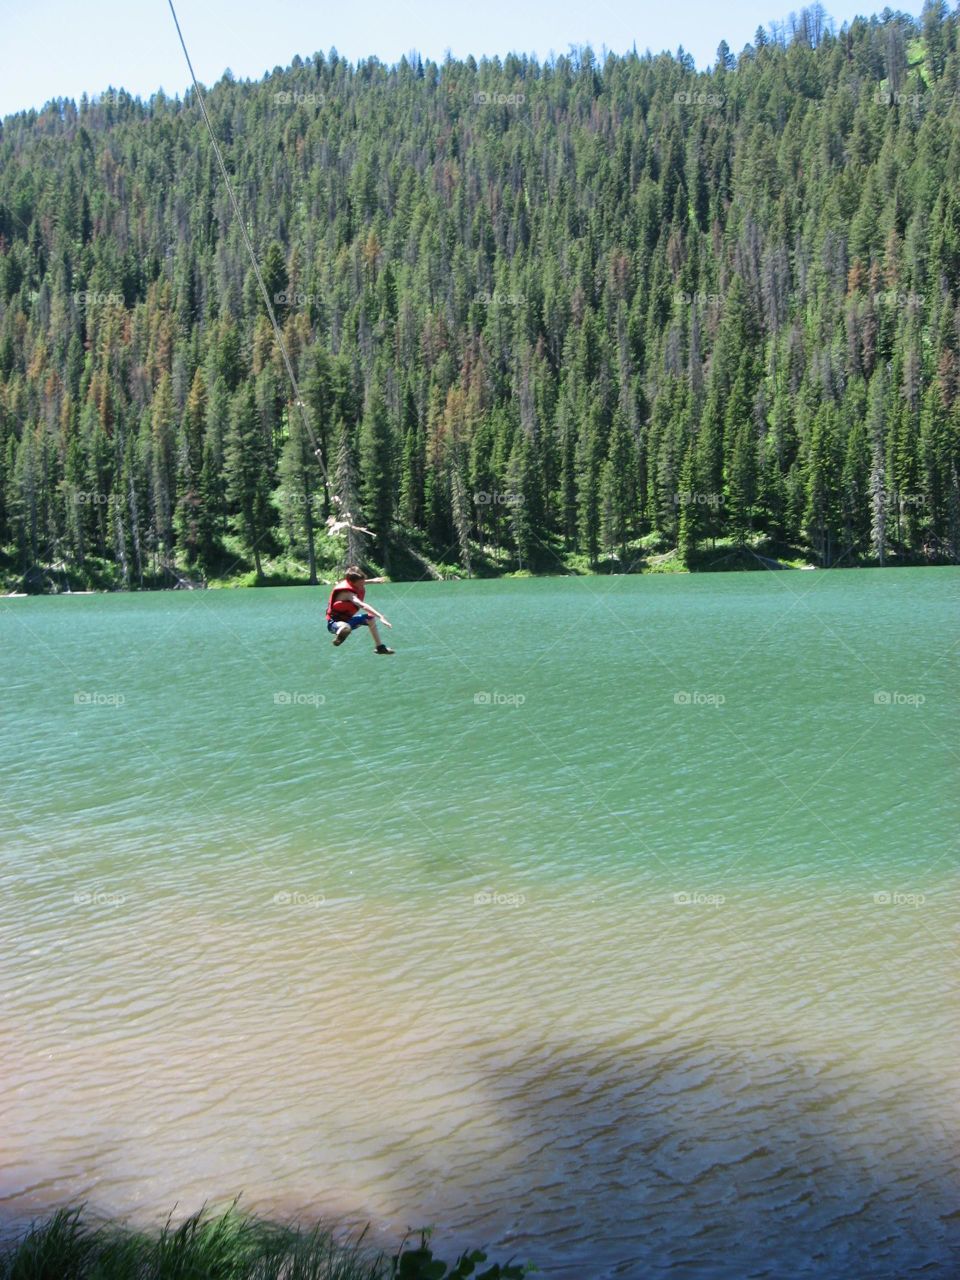 There is never a time more free than falling from the rope swing into the icy water at a mountaintop lake.